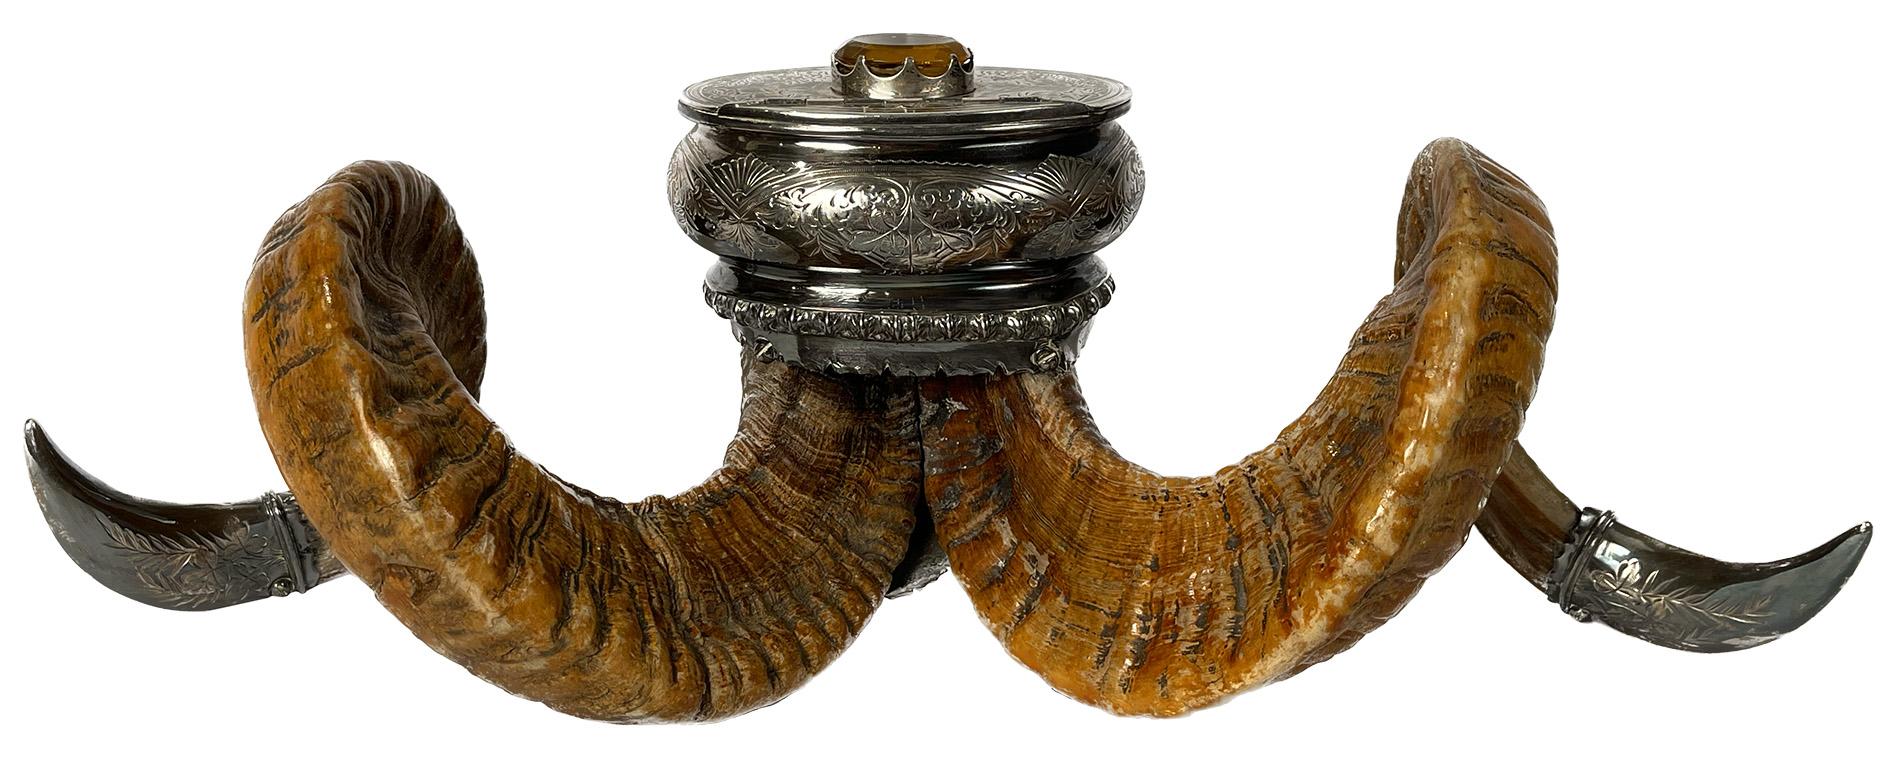 A late 19th century Scottish silver-plated ram horn snuff mull with oval cairngorm gem on lid and Walker & Hall (Sheffield, England) silver mark on lid.

Dimensions: 7.5